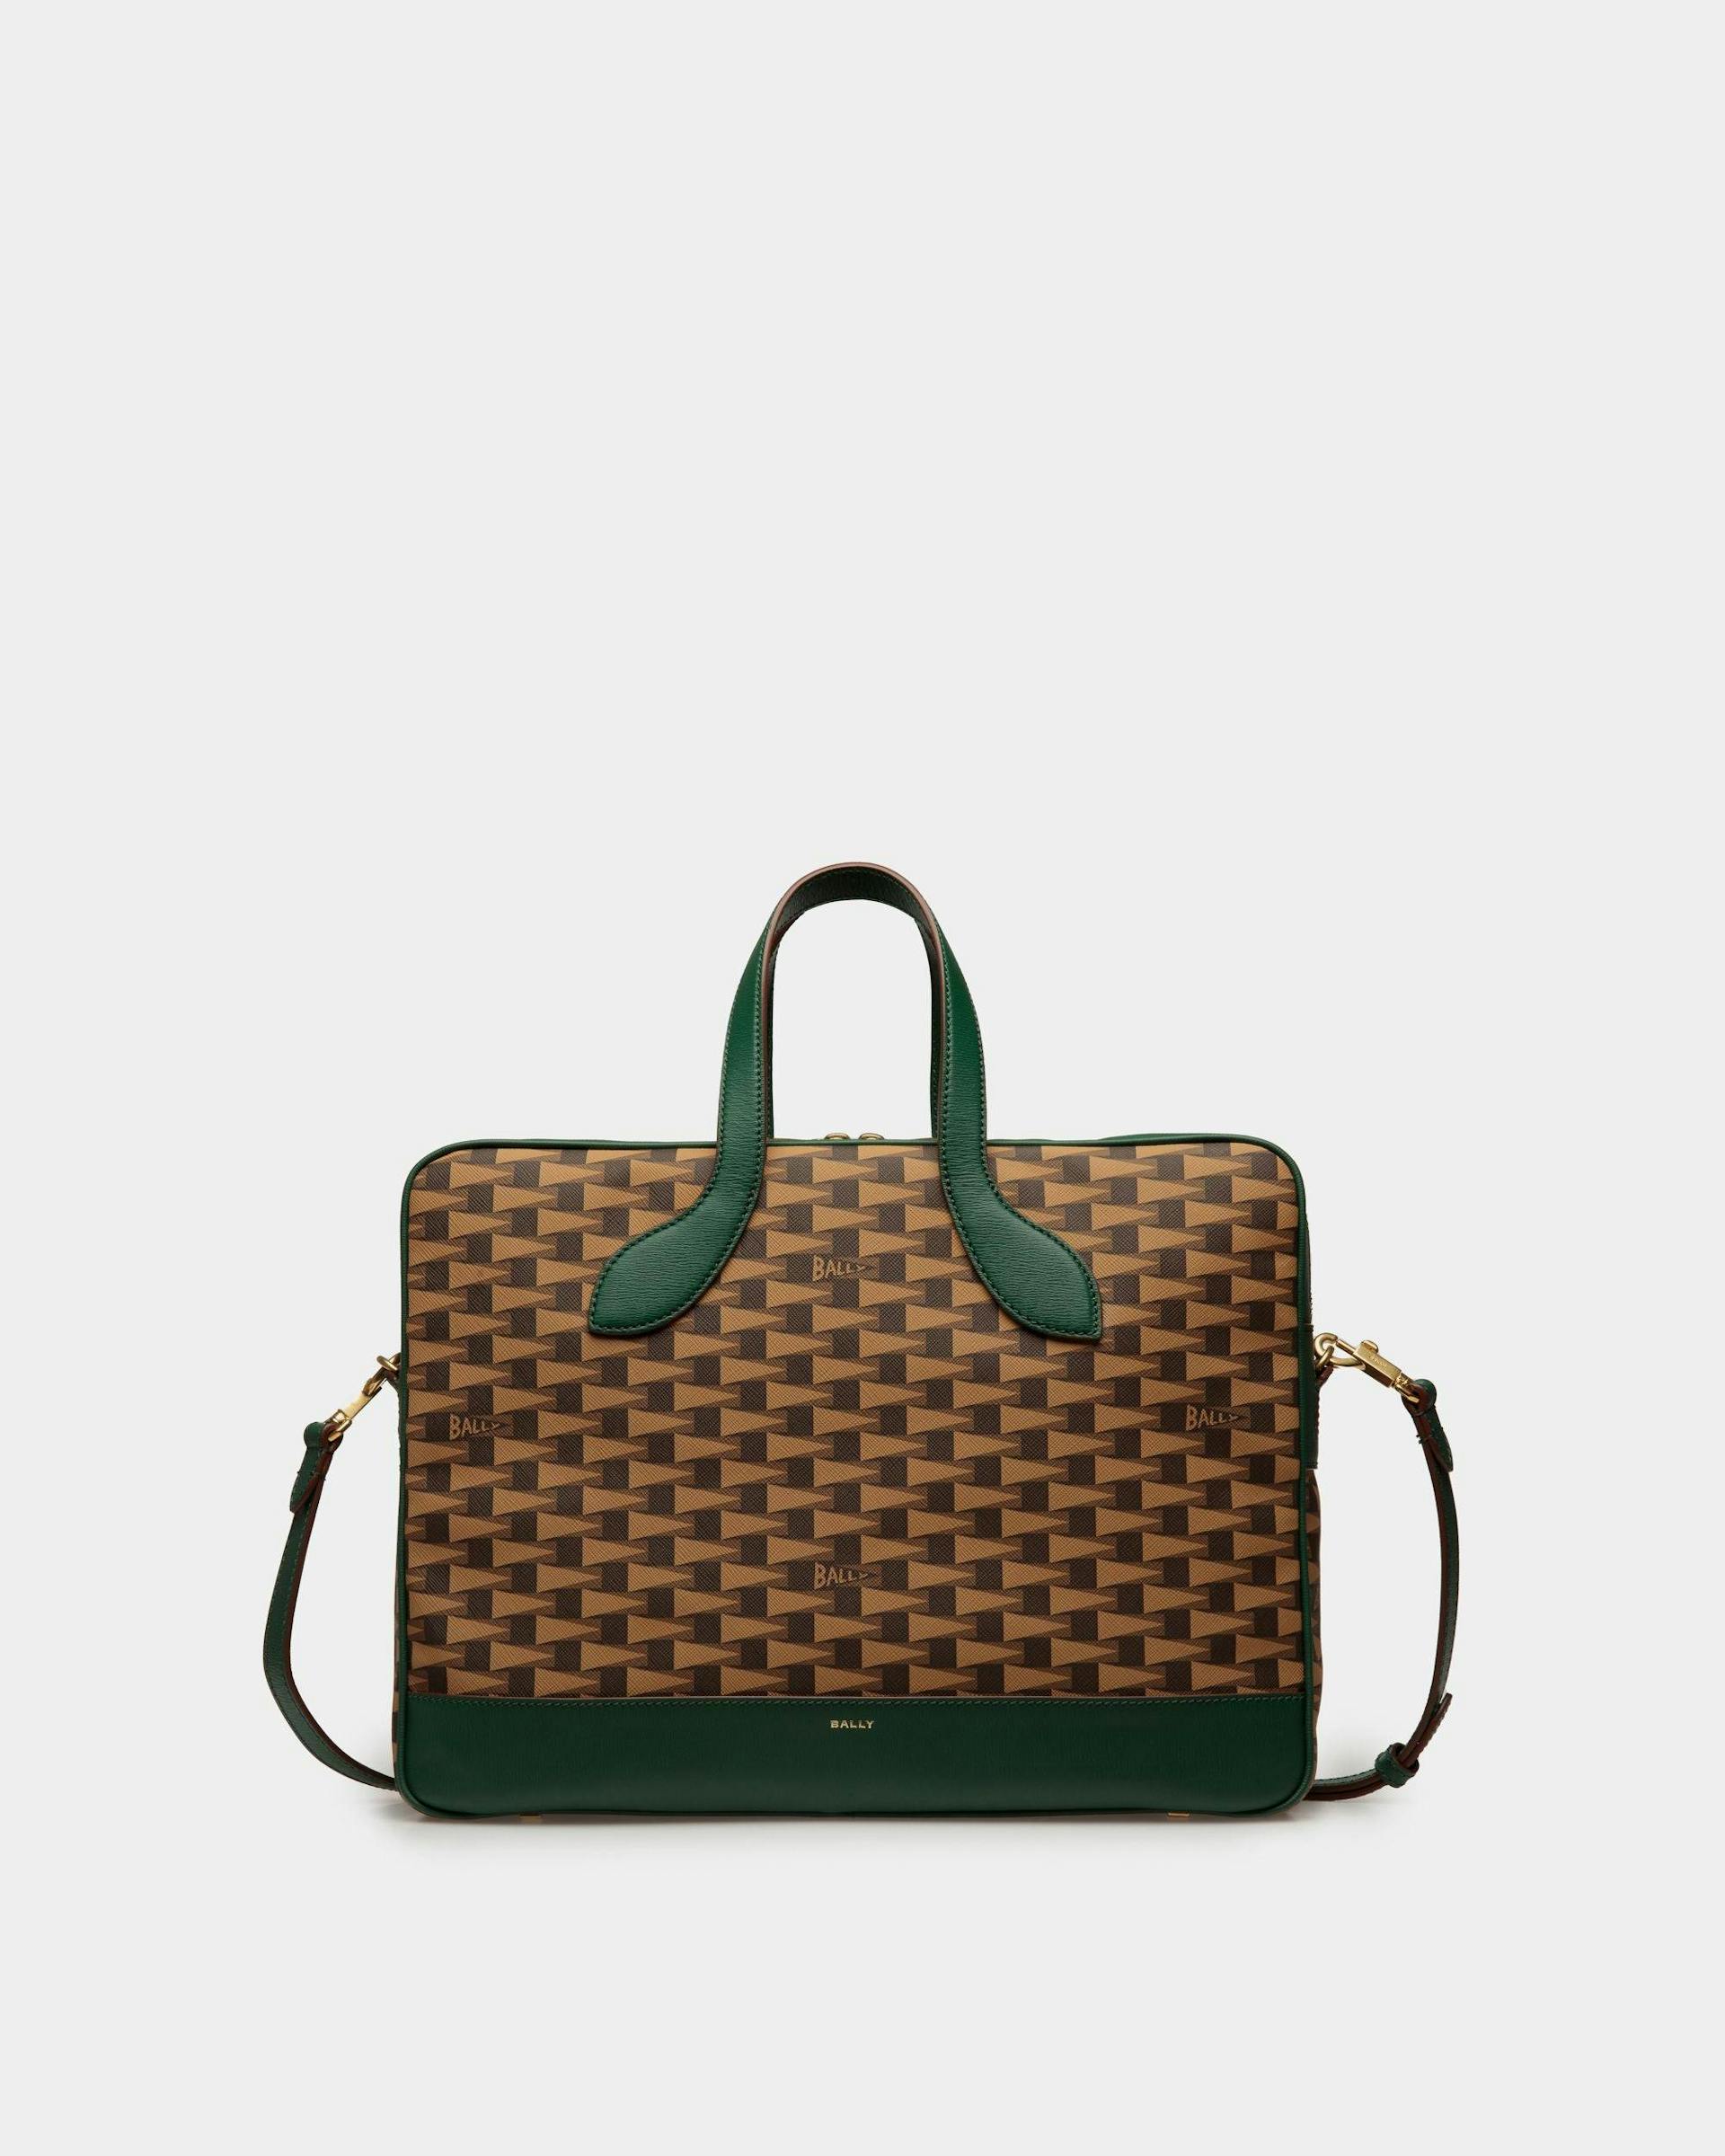 Men's Pennant Briefcase In Desert TPU And Kelly Green Leather | Bally | Still Life Front